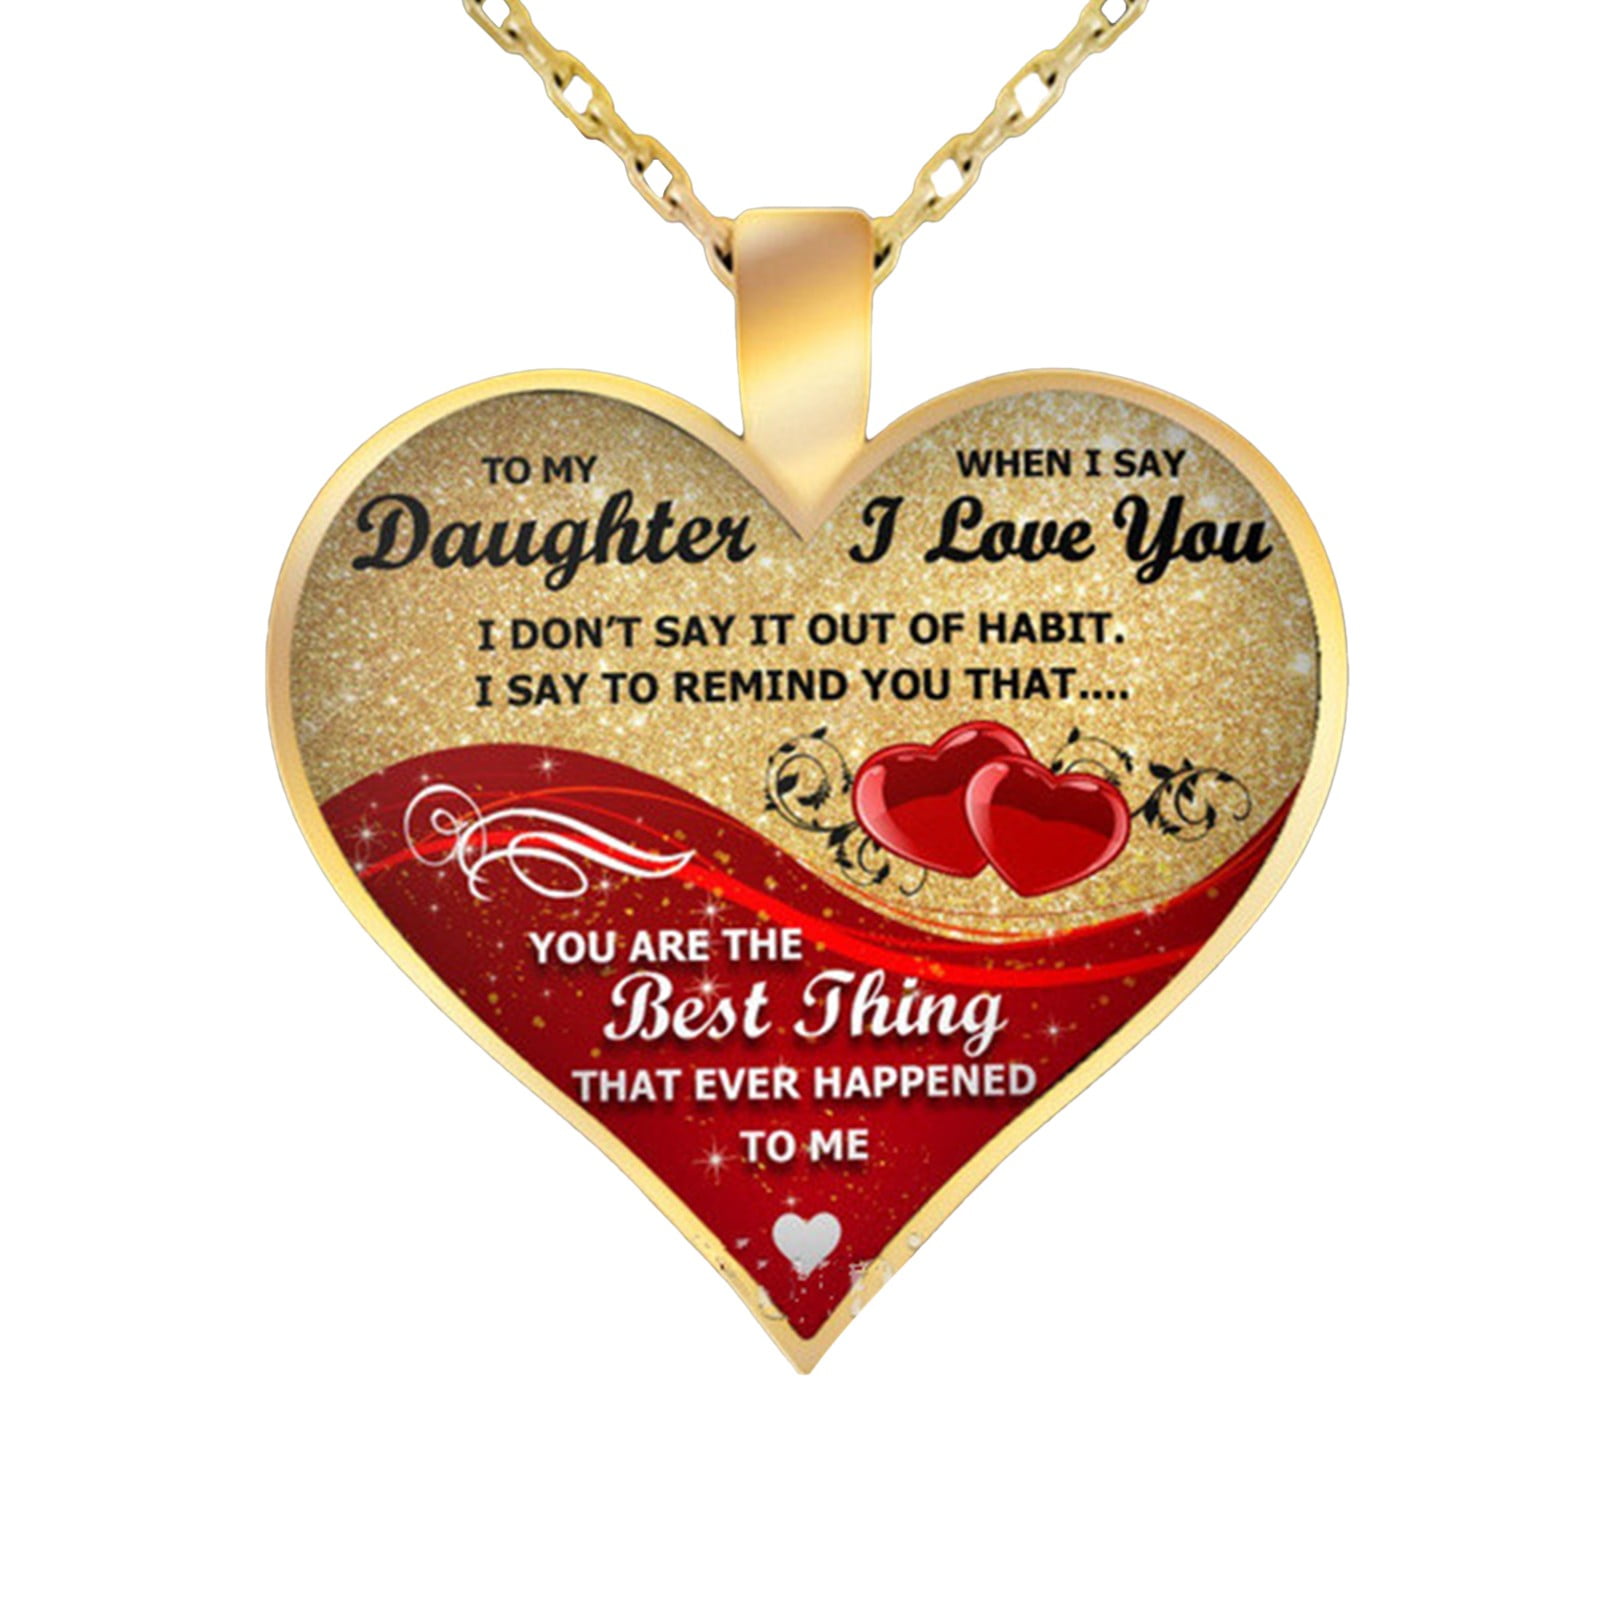 MY MIND STILL TALKS TO YOU Heart Necklace Mother's Day Gift Jewelry ...